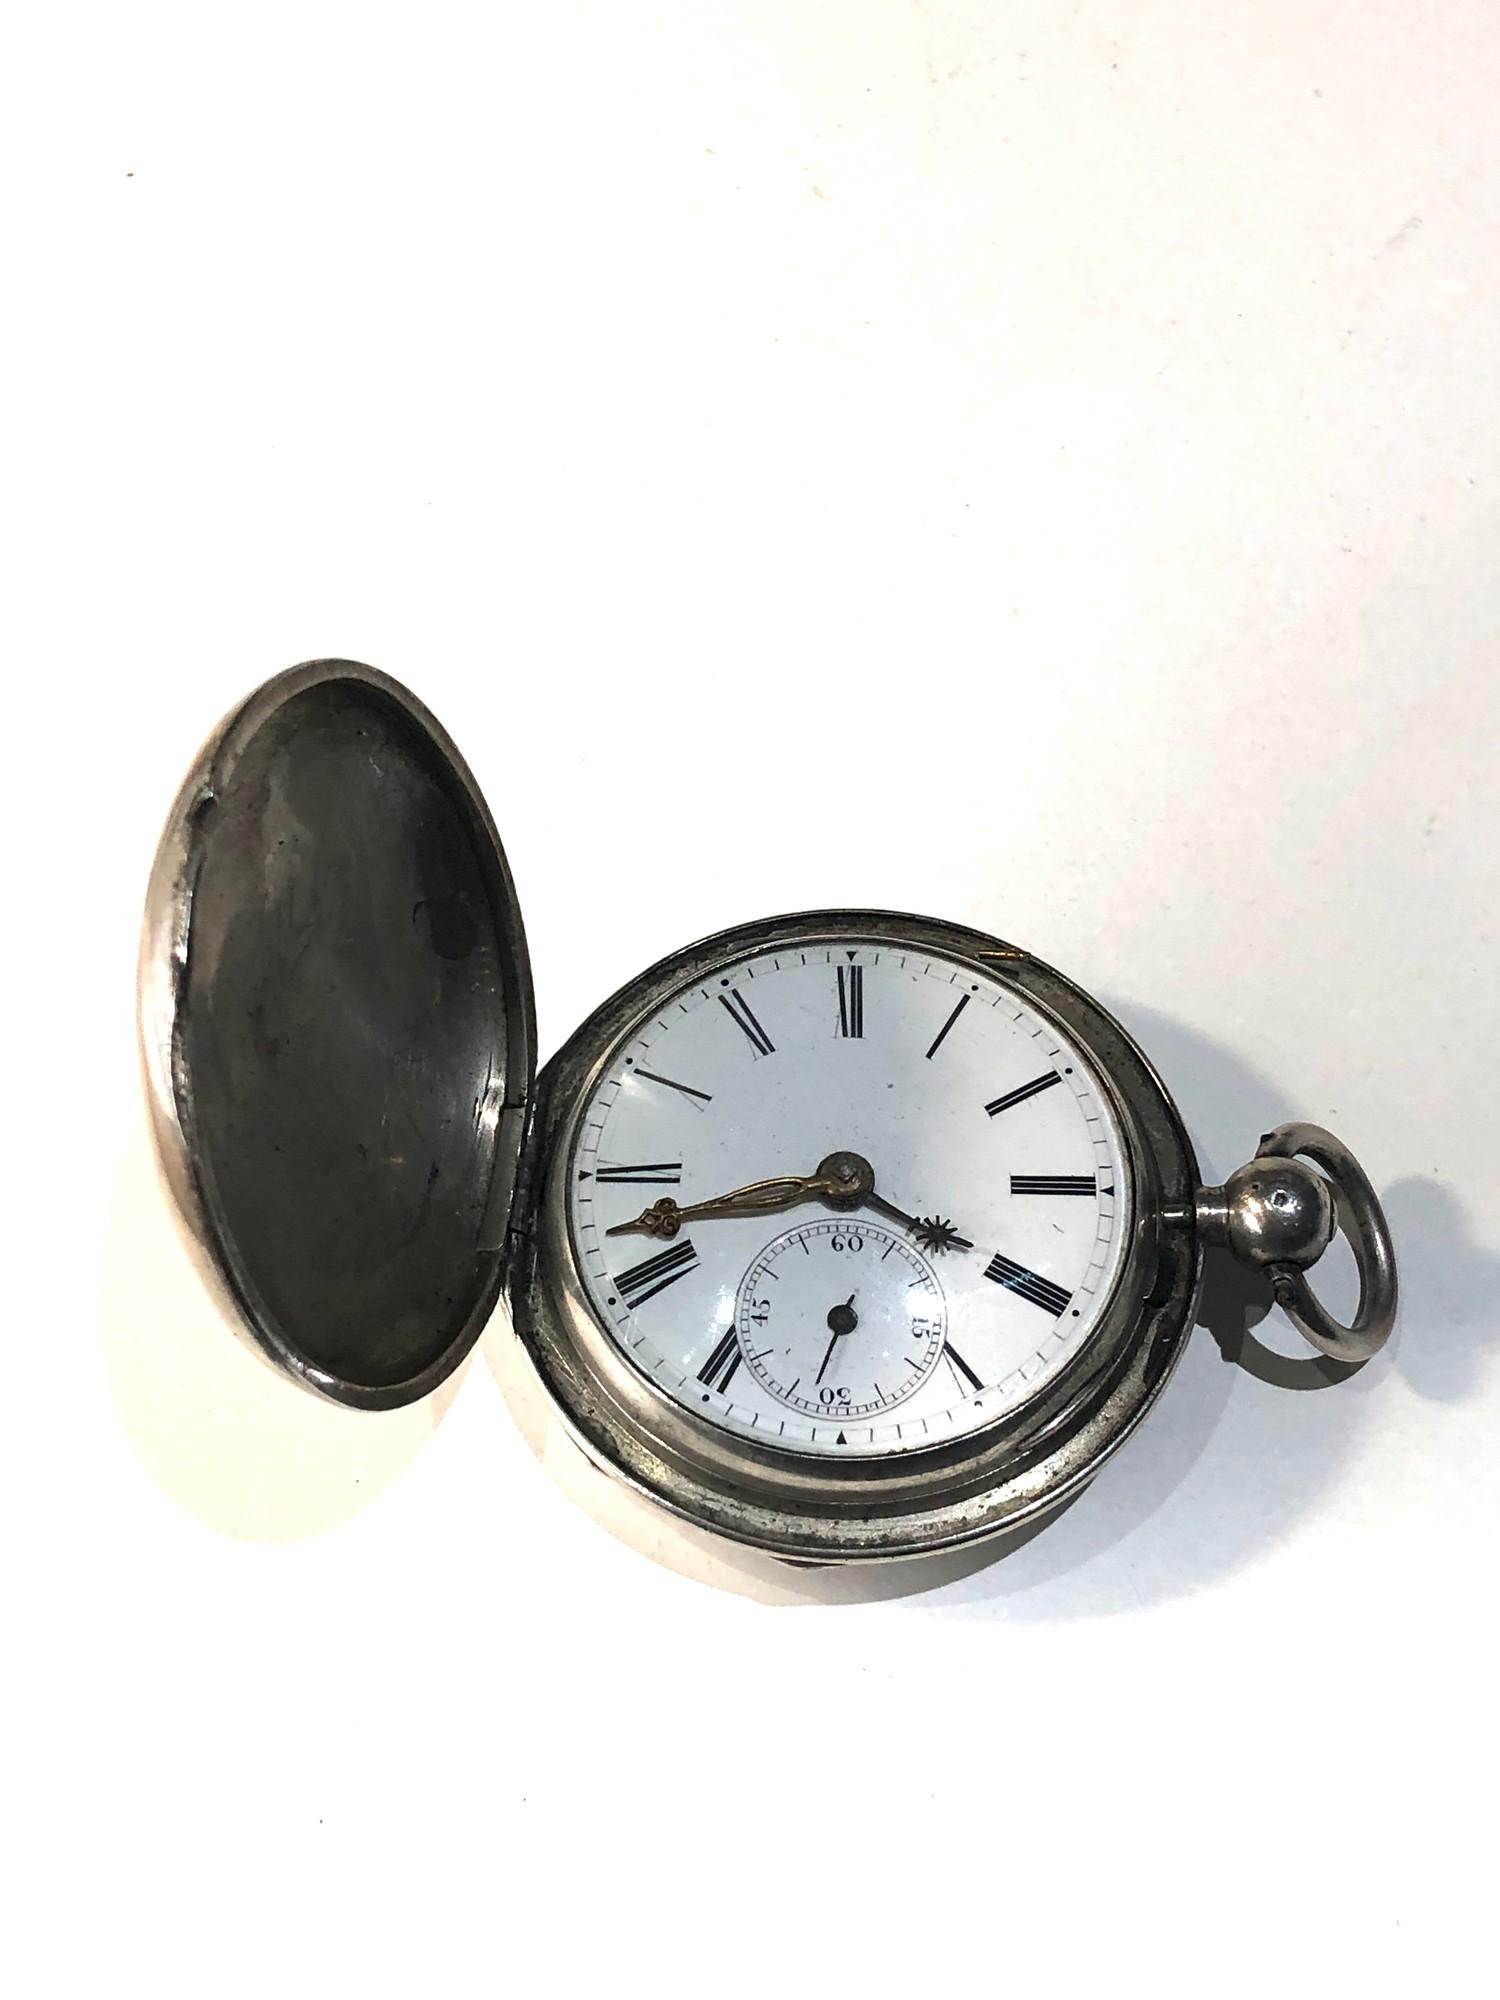 Antique verge Fusee silver full hunter pocket watch the watch is full wound and does not tick the - Image 8 of 10